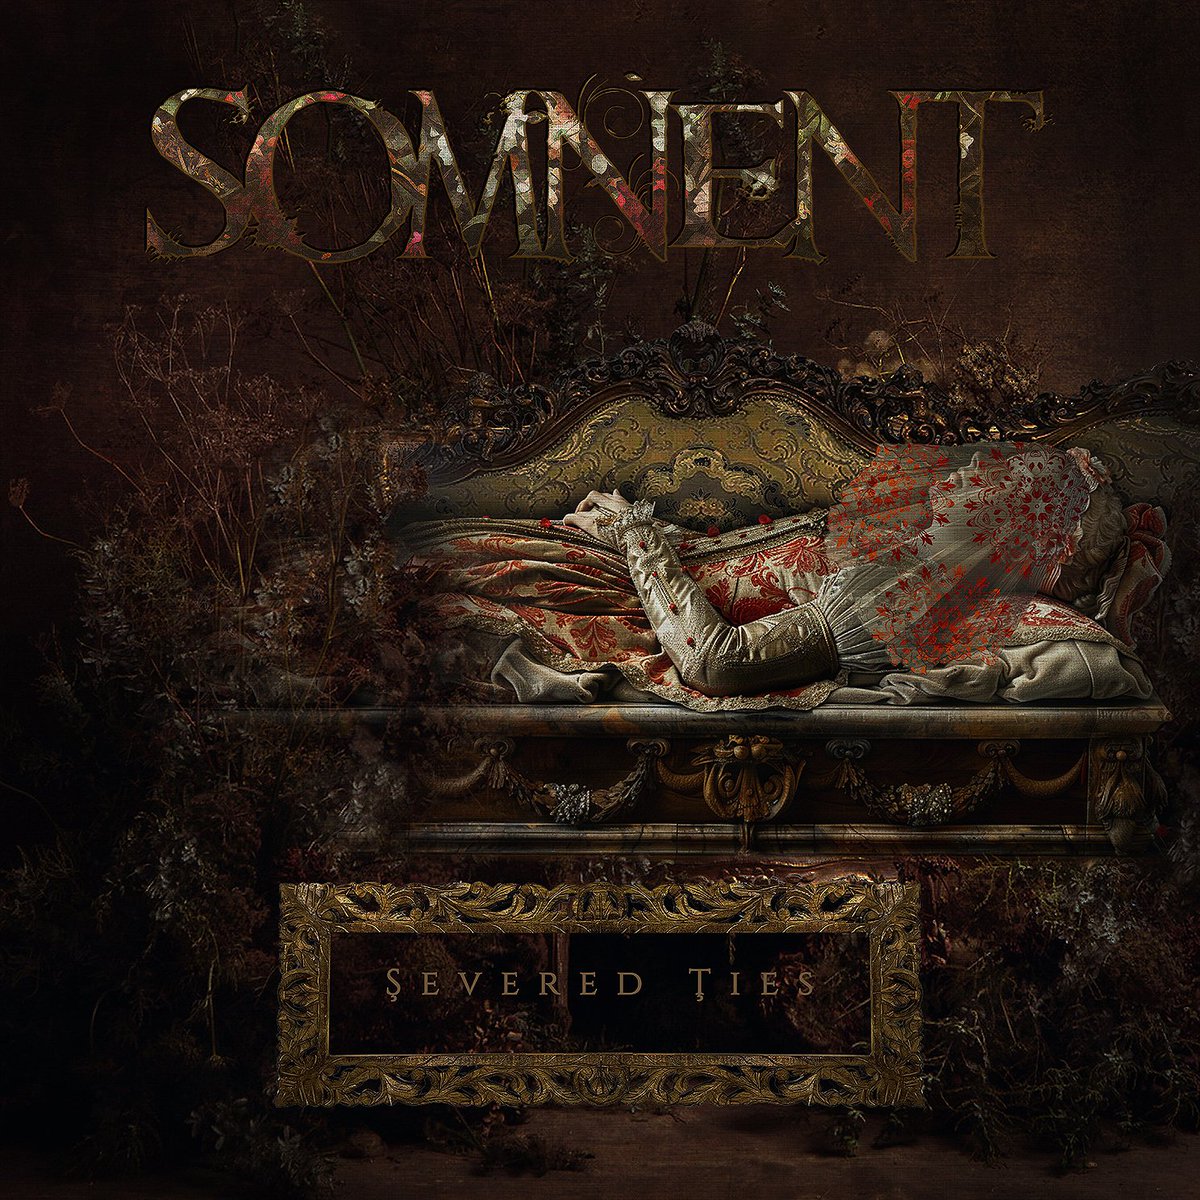 FULL FORCE FRIDAY:🆕May 10th Release 4⃣3⃣🎧 SOMNENT - Severed Ties 🇺🇸 💢 3rd album from Orlando, FL, U.S Melodic Doom/Death Metal outfit 💢 WHIPPED➡️songwhip.com/somnent/severe… (full stream asap) 💢 #Somnent #SeveredTies @ImperativePR #MelodicDoomDeath #FFFMay10 #KMäN